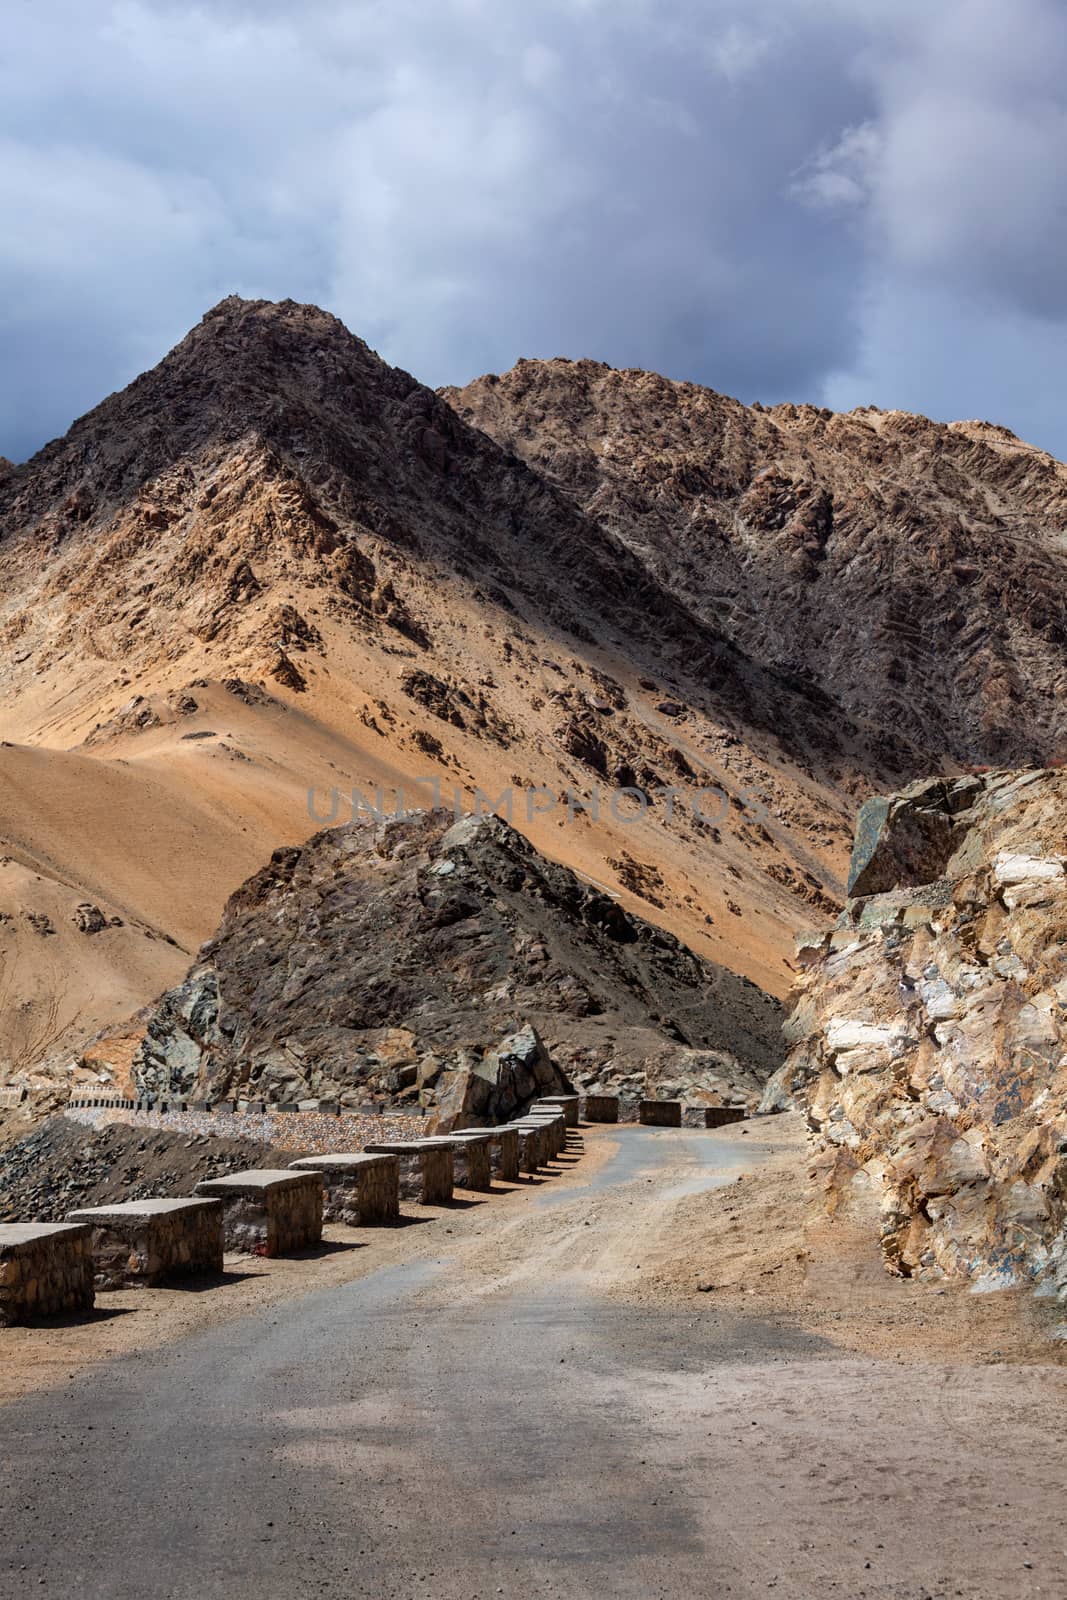 Road in Himalayas with mountains by dimol